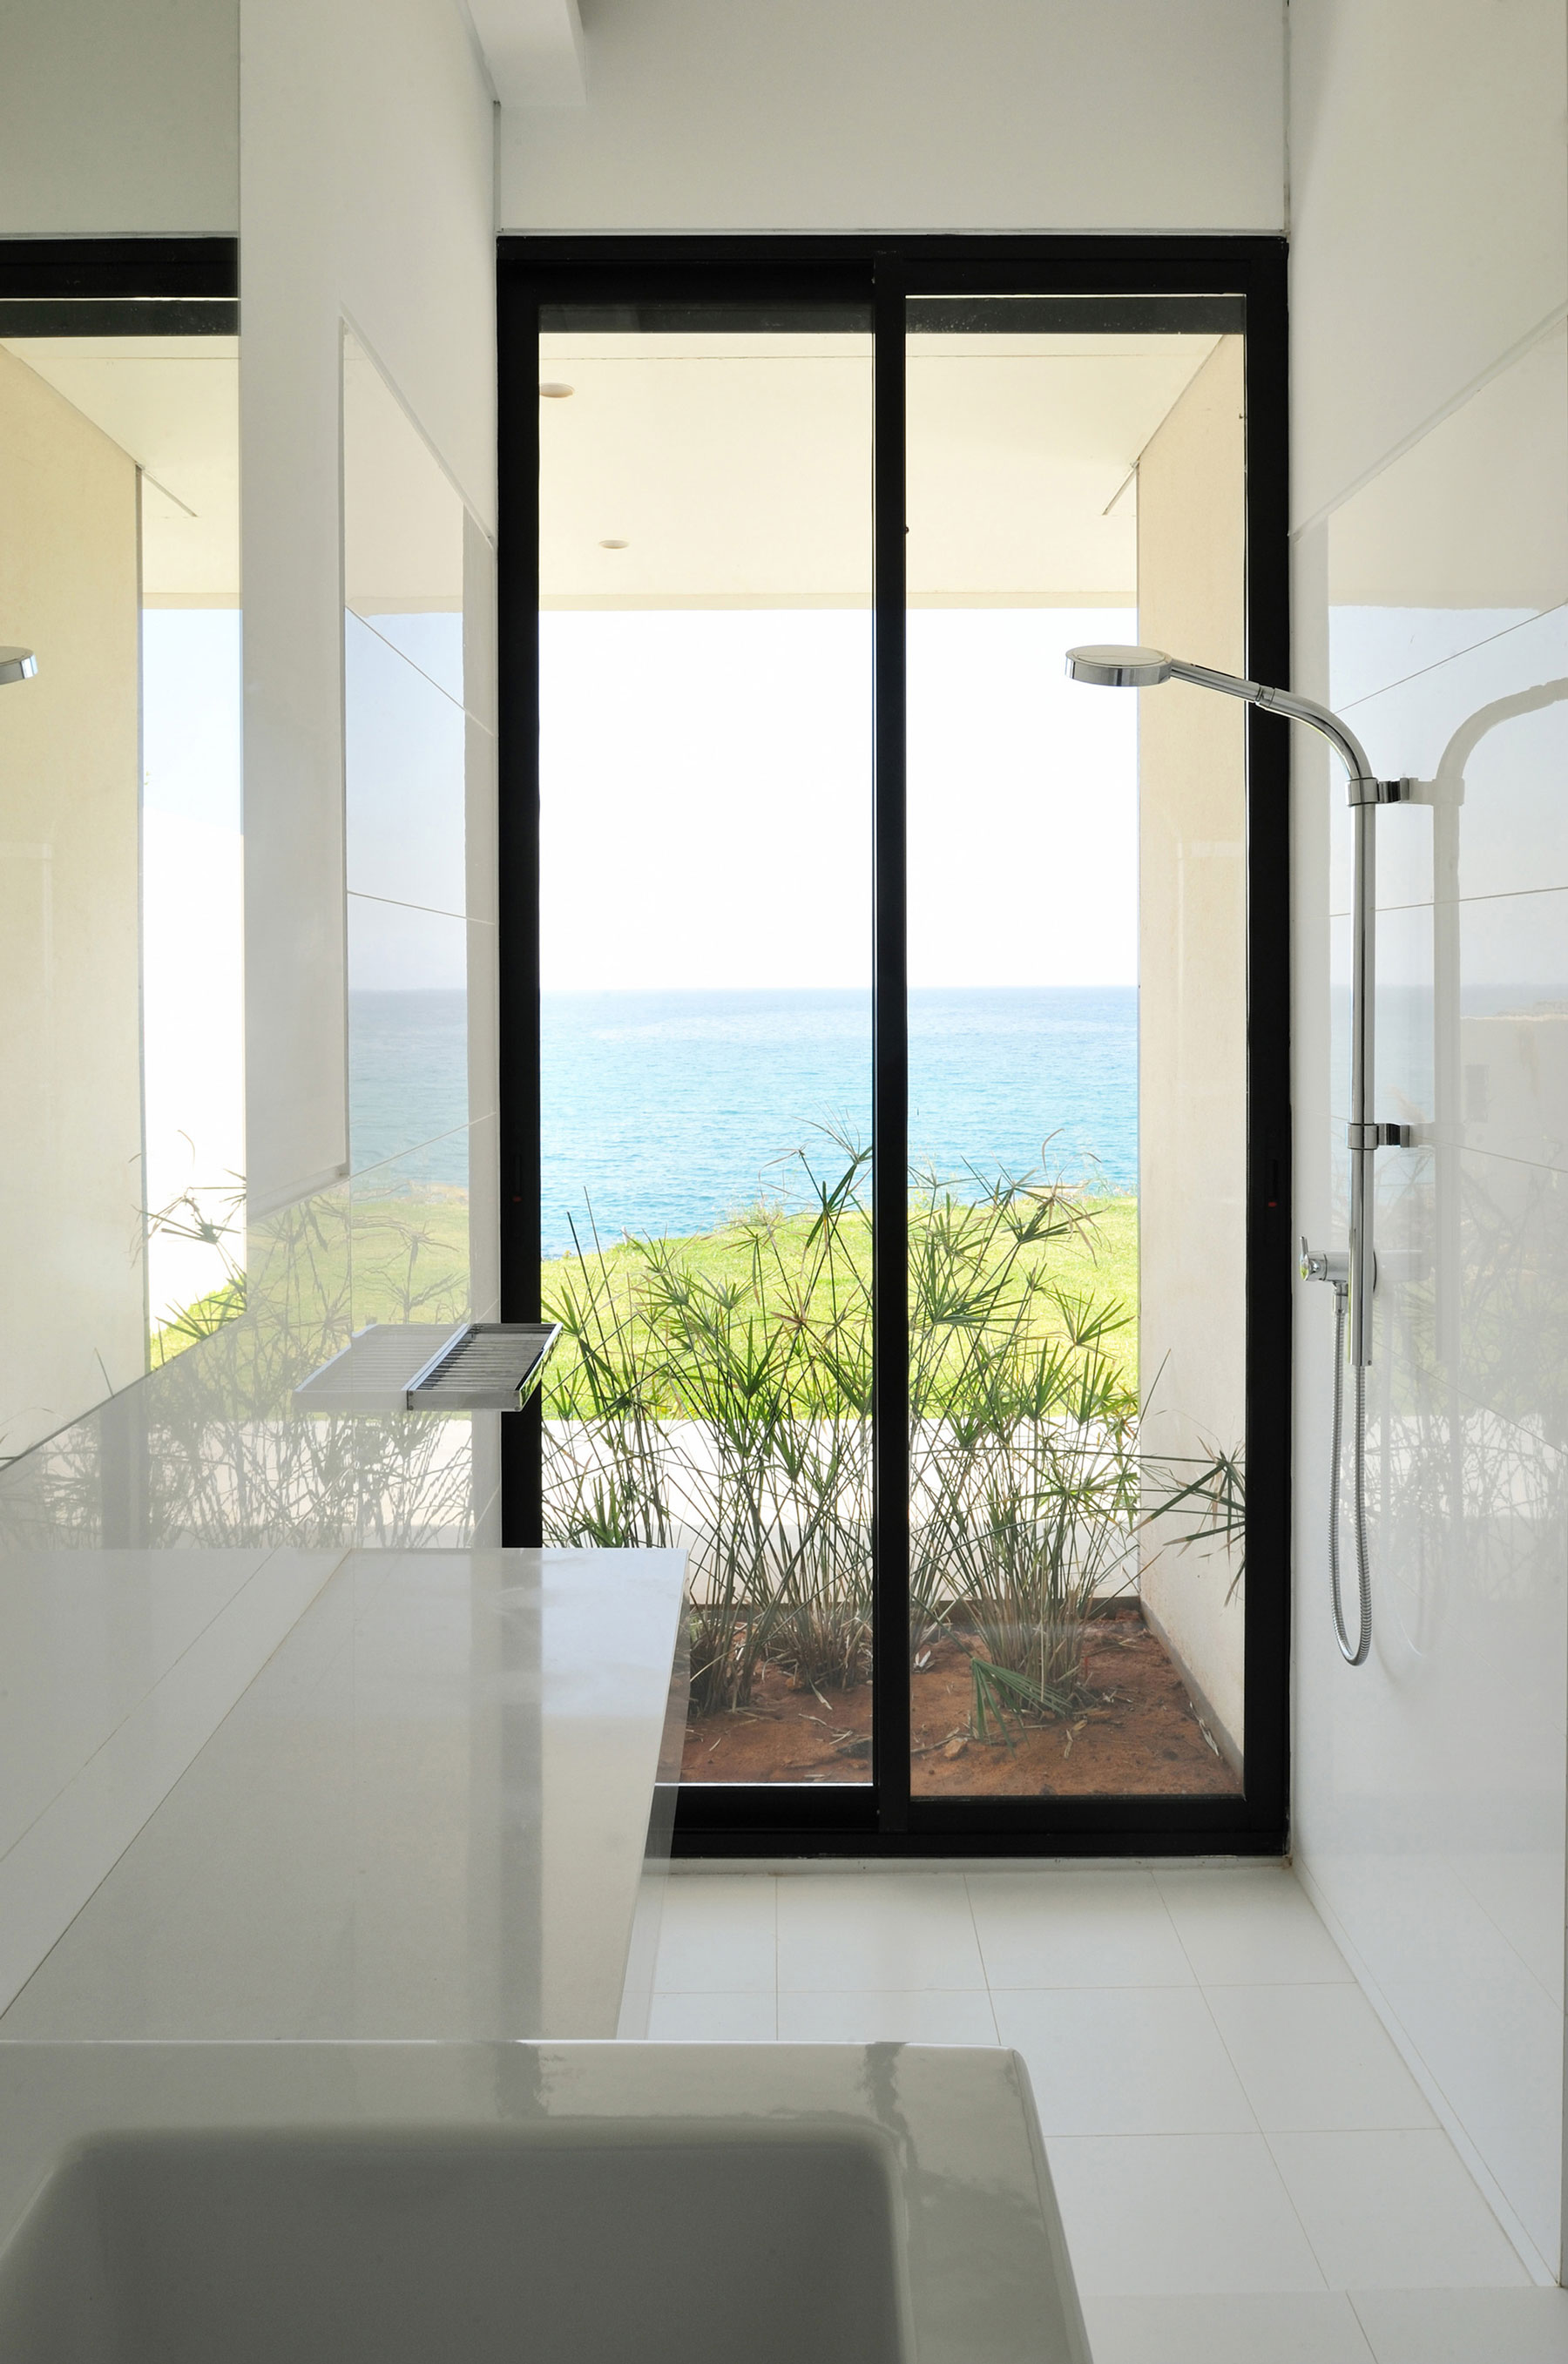 Beach View Plants Wonderful Beach View And Ornamental Plants Fidar Beach House Interior Glass Door In Dark Frame Stainless Steel Shower Porcelain Washing Stand  Futuristic Modern Beach House With Neutral Color Palettes For A Family Of Five